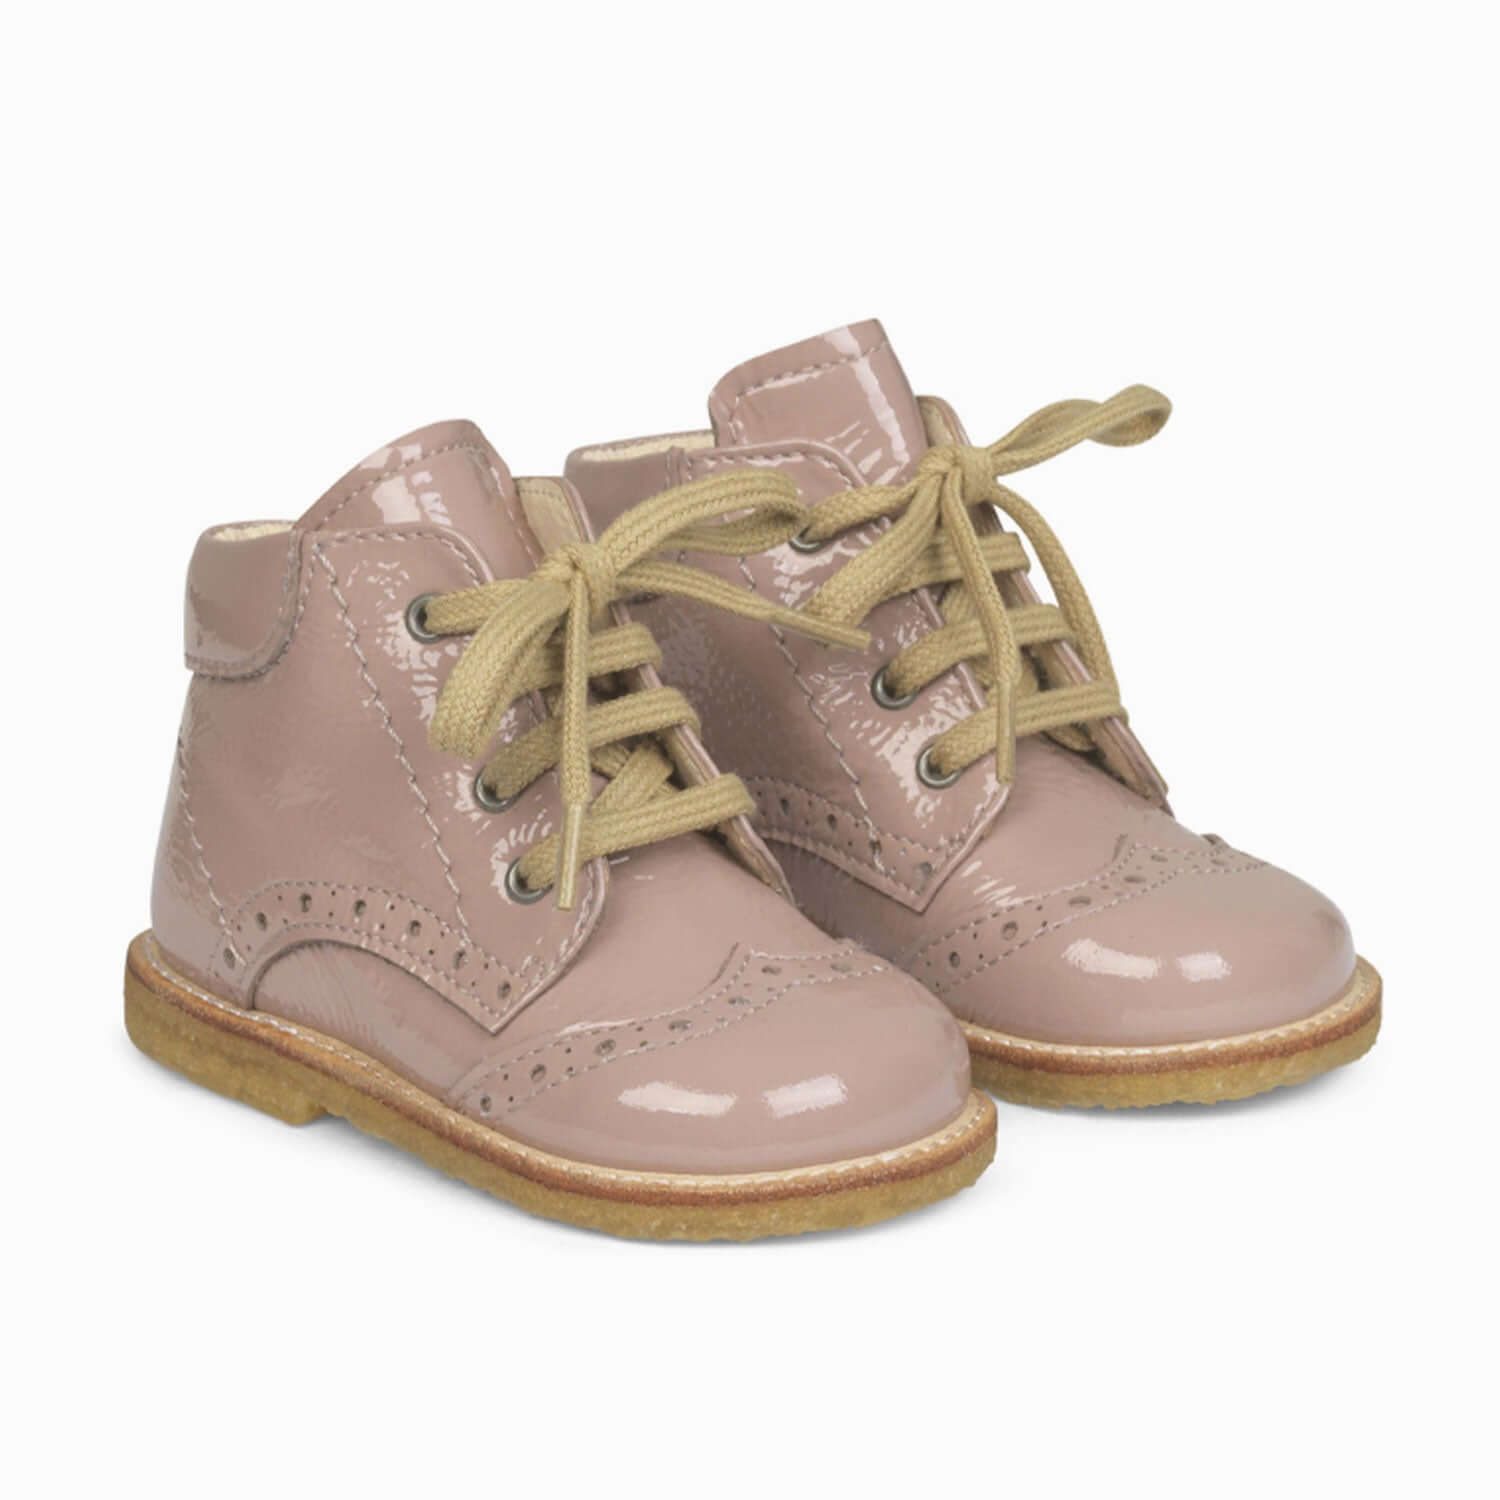 An image of Kids Boots - Toddler Boots - Kids Winter Boots With Laces - Rose | Angulus EU25/...